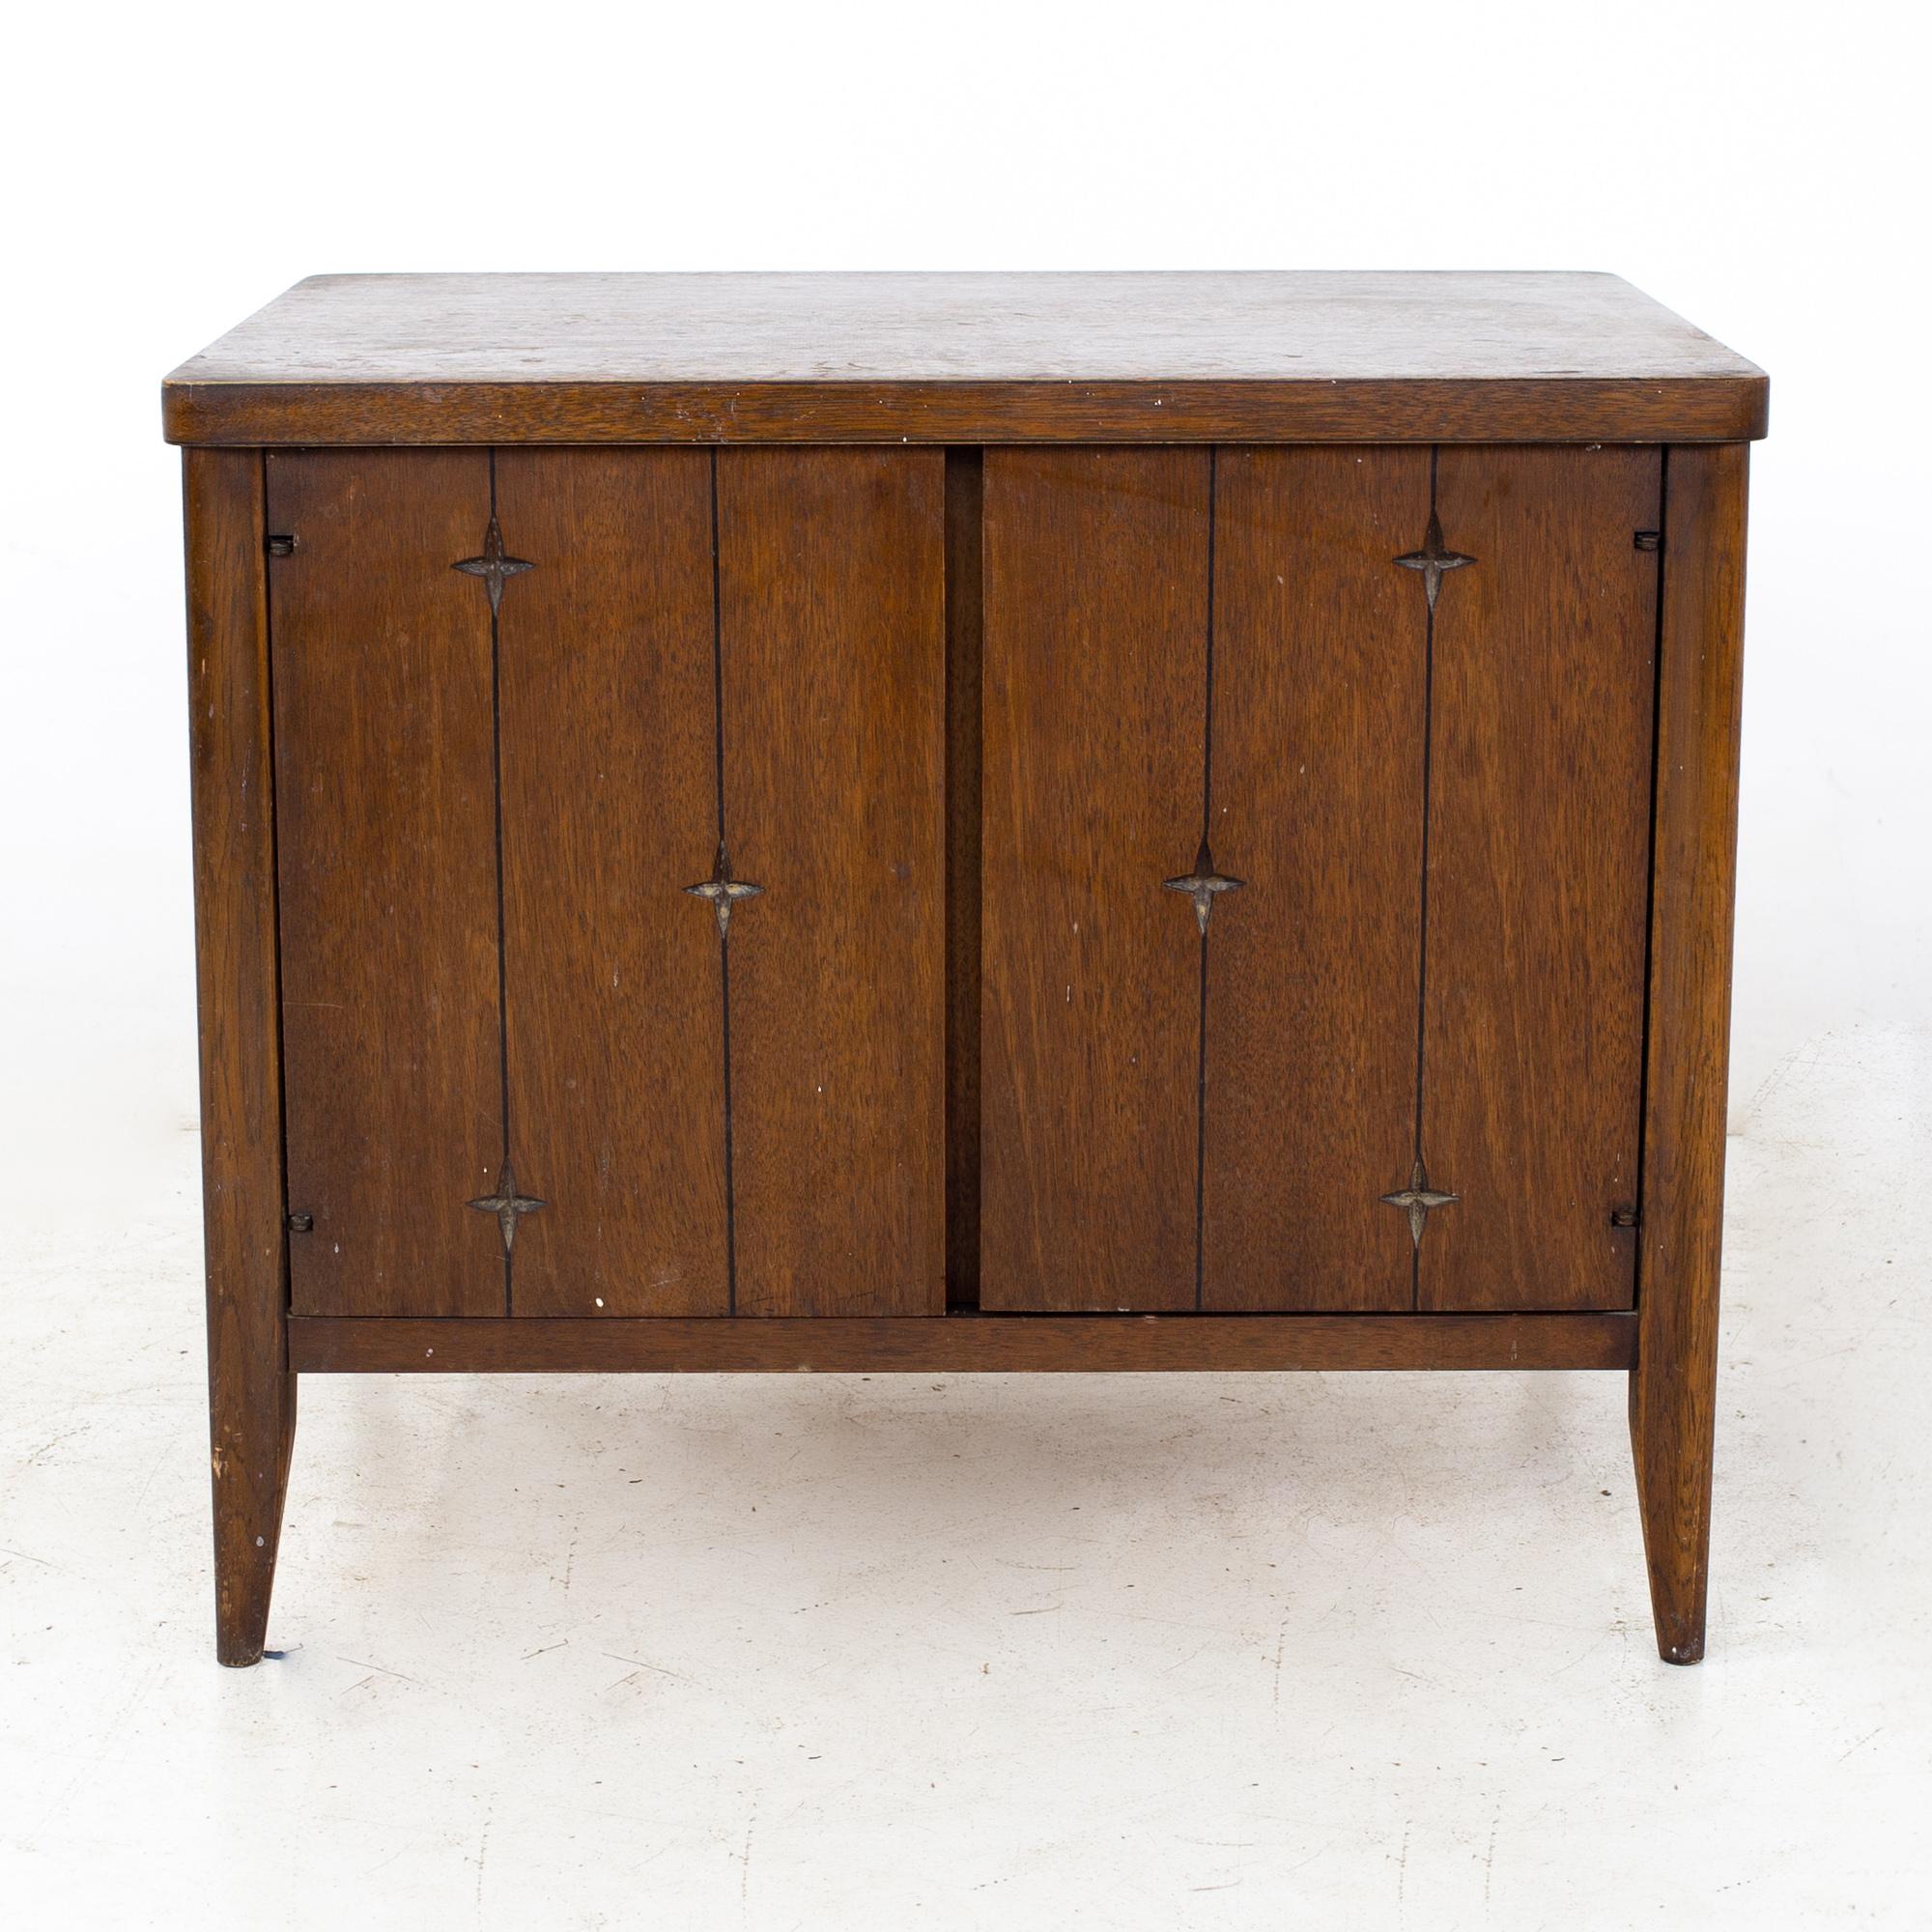 Broyhill saga mid century walnut commode nightstand
Nightstand measures: 26 wide x 20 deep x 22 inches high

All pieces of furniture can be had in what we call restored vintage condition. That means the piece is restored upon purchase so it’s